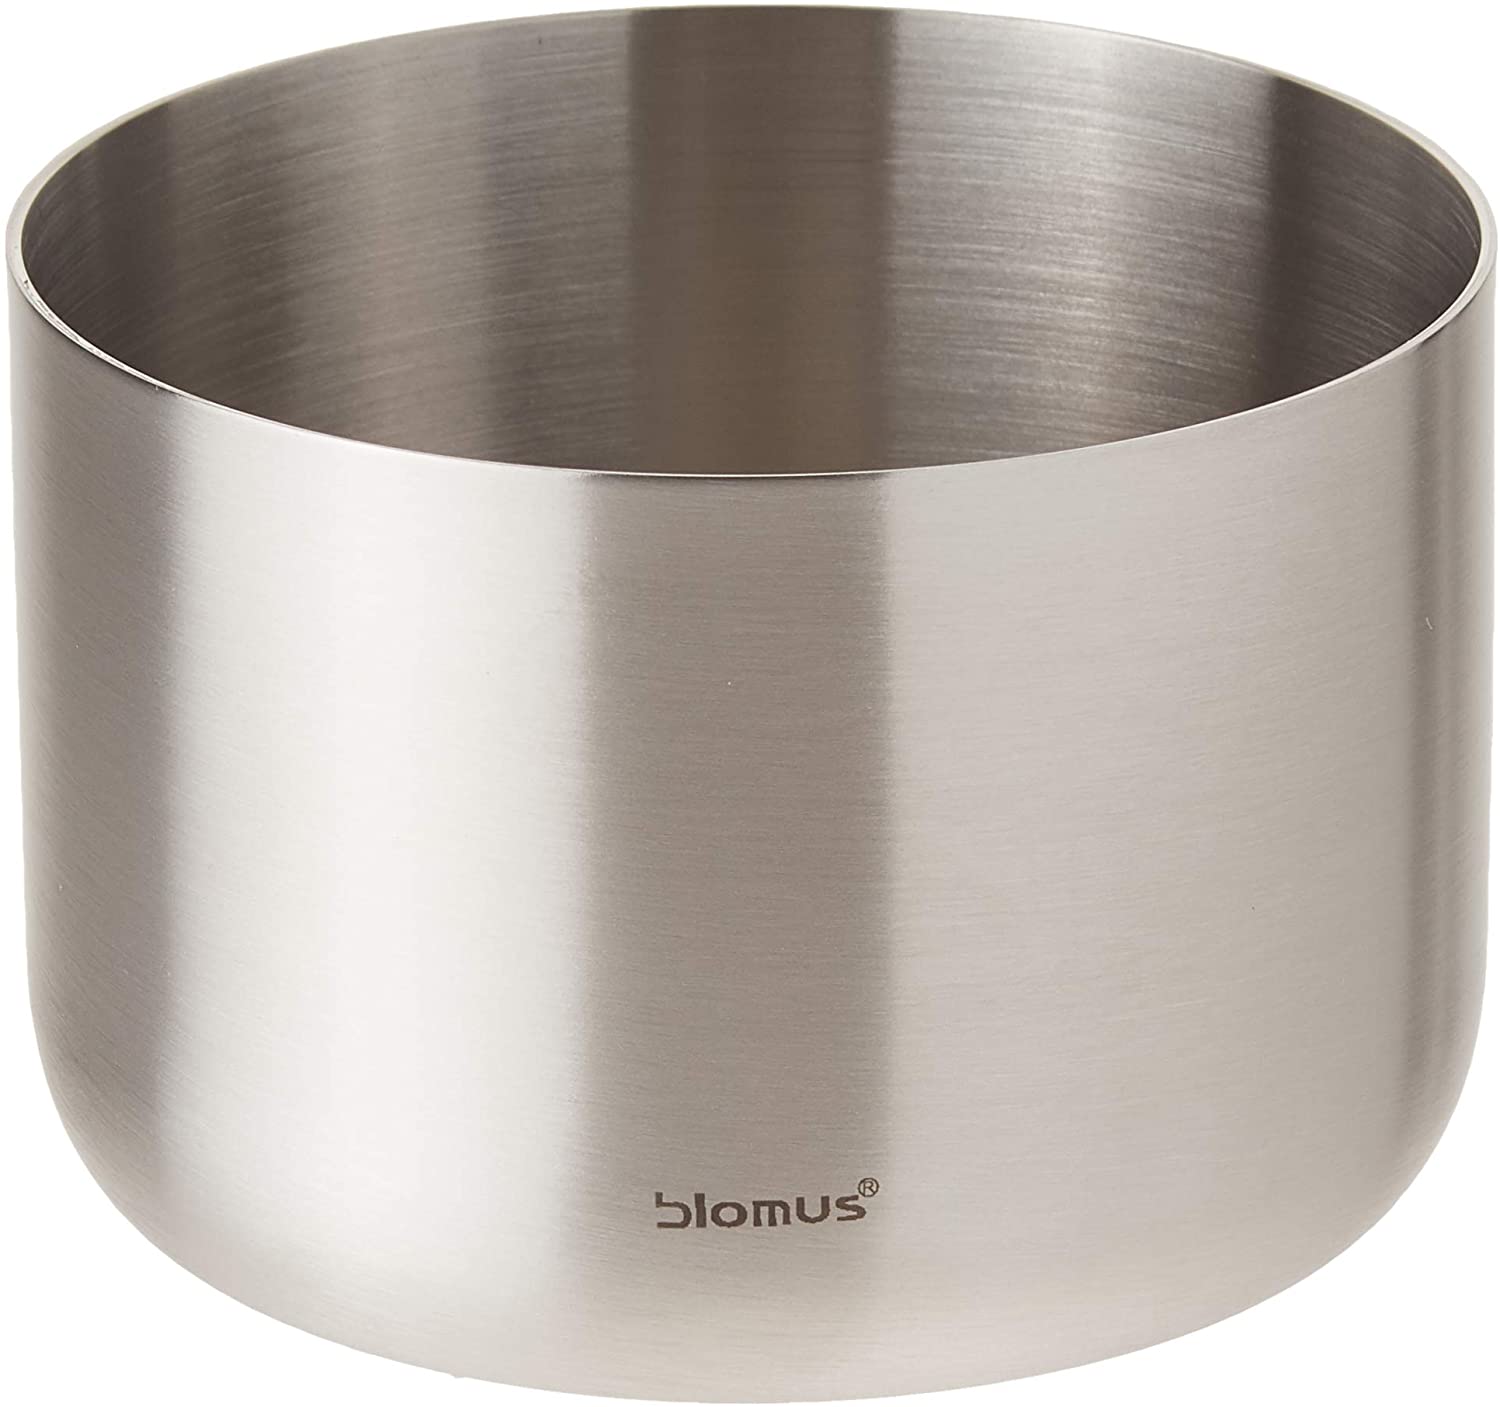 blomus -BASIC 63633 Snack Bowl S Matte Stainless Steel Serving Bowl Dip Bowl Decorative Bowl for Dessert Fruit Sauce for Side Dishes Dishwasher Safe (H x W x D): 5.5 x 8 x 8 cm Stainless Steel